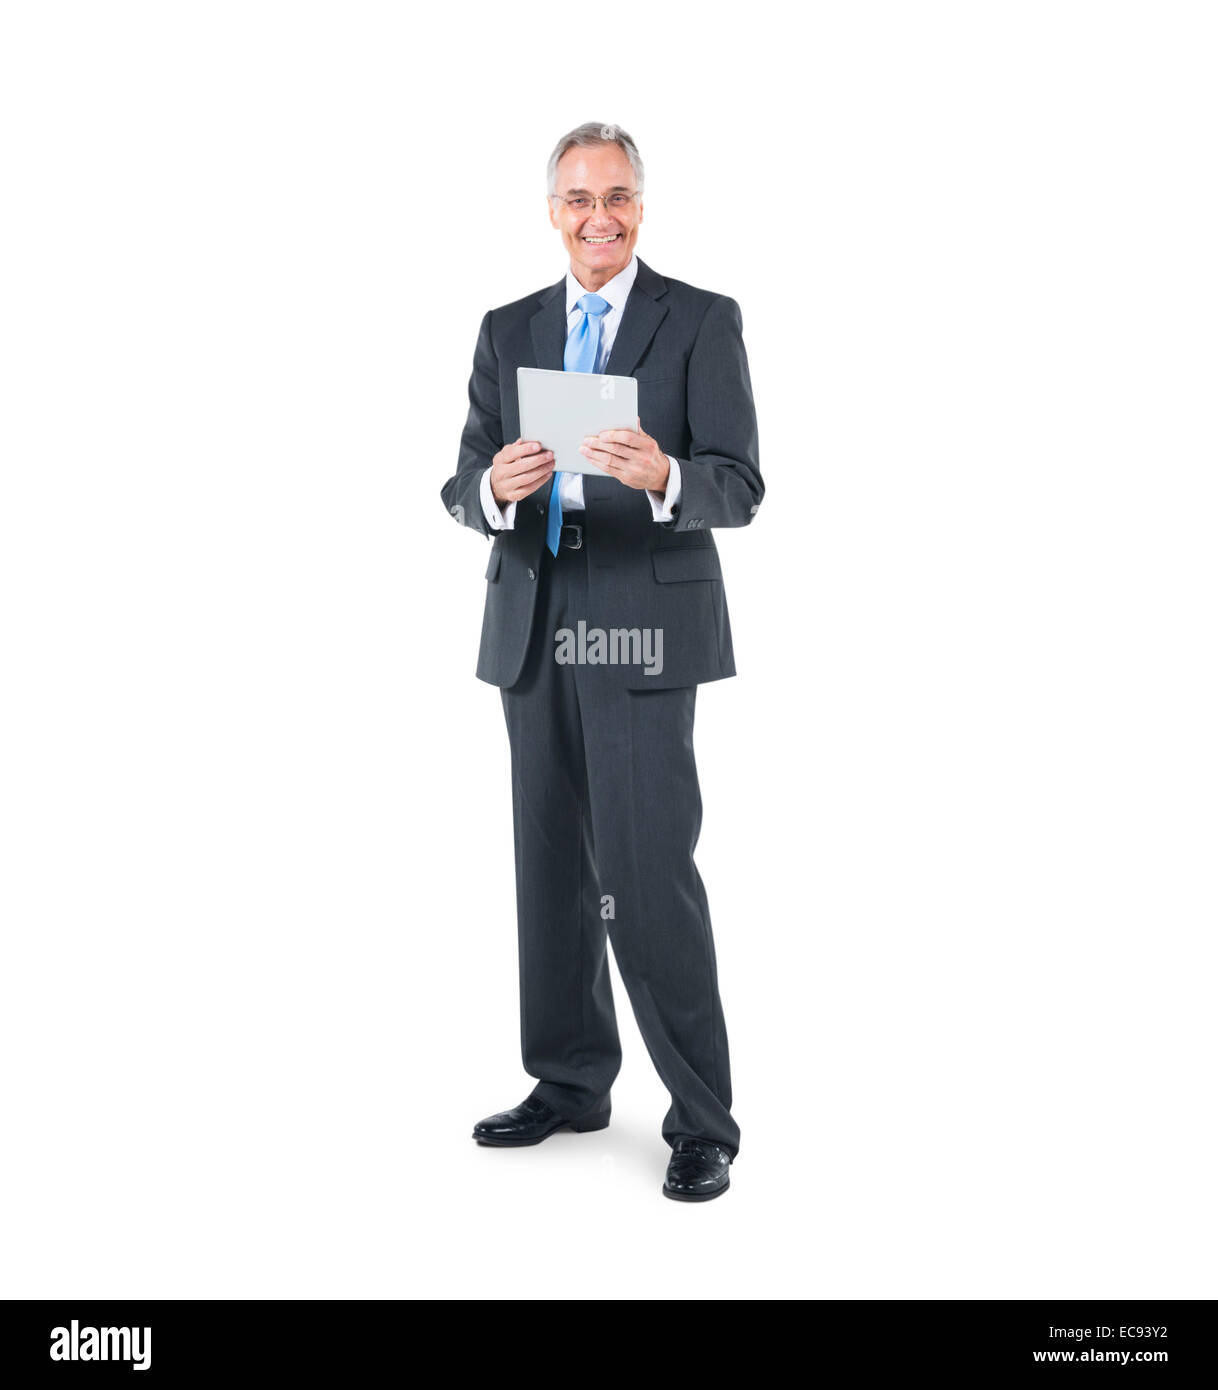 A Cheerful Businessman holding a Digital Tablet Banque D'Images